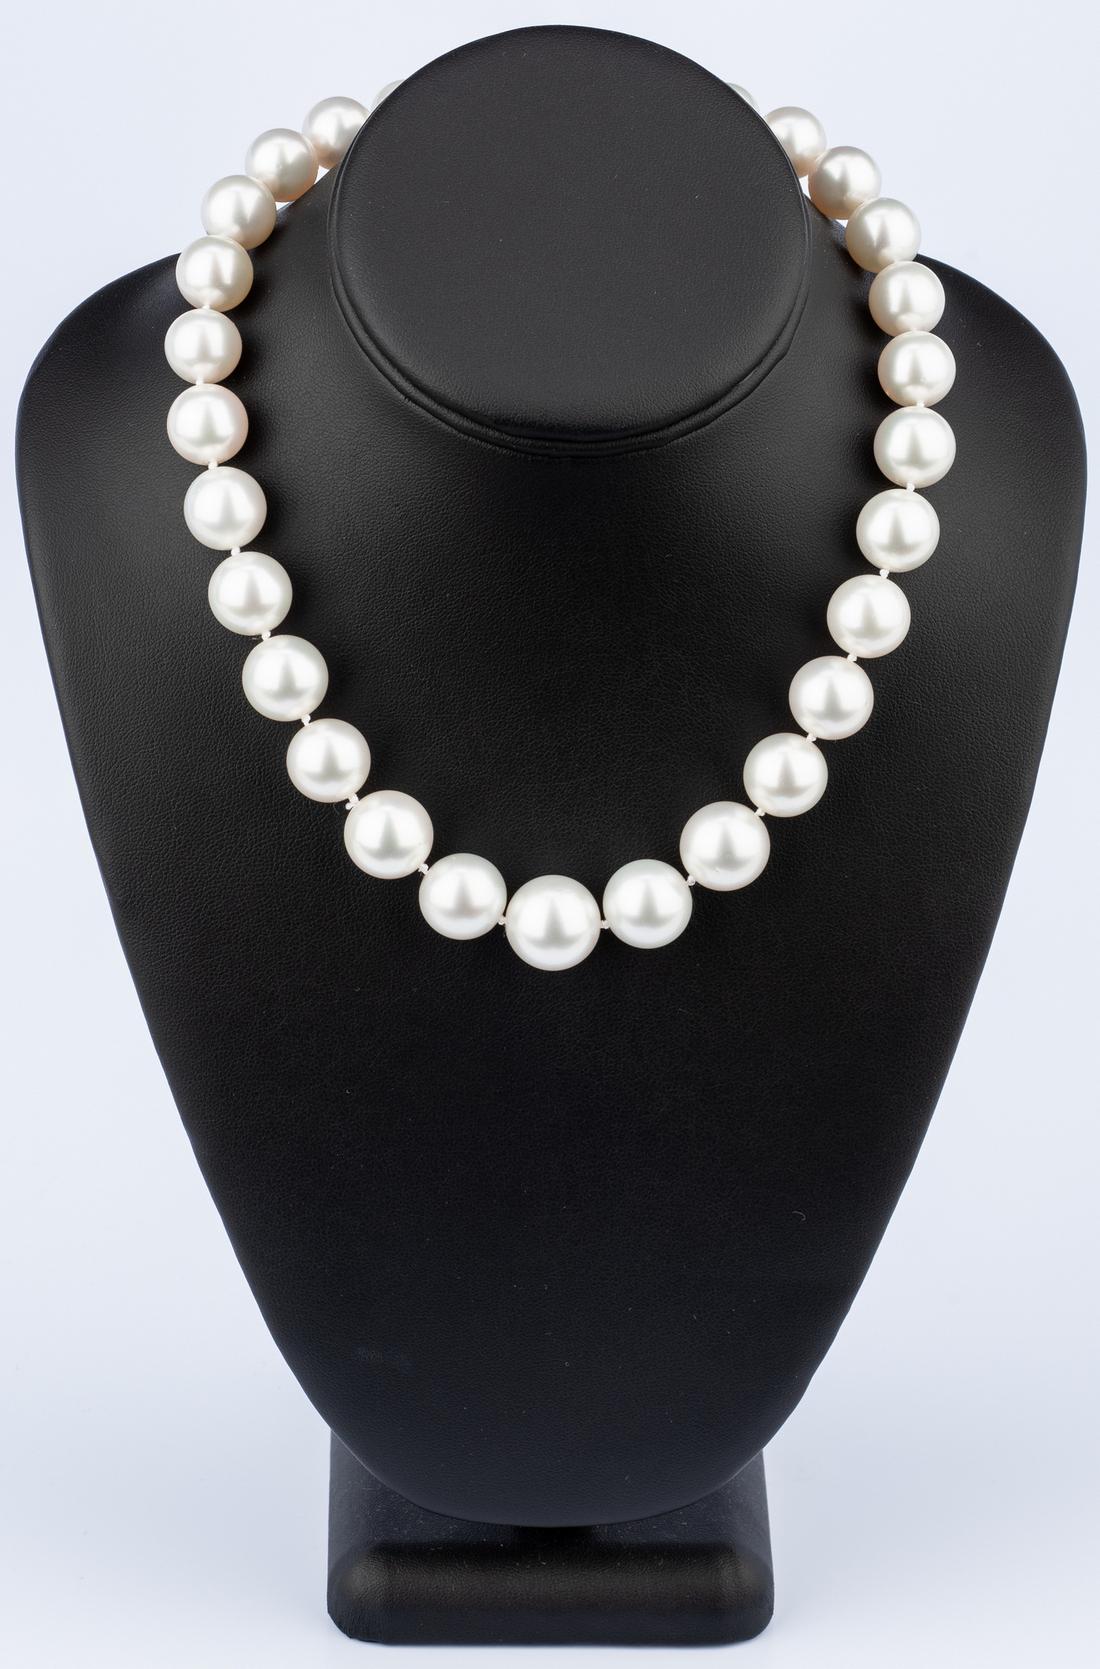 South Sea Pearl Necklace, 13.1-16.6mm - Image 9 of 11